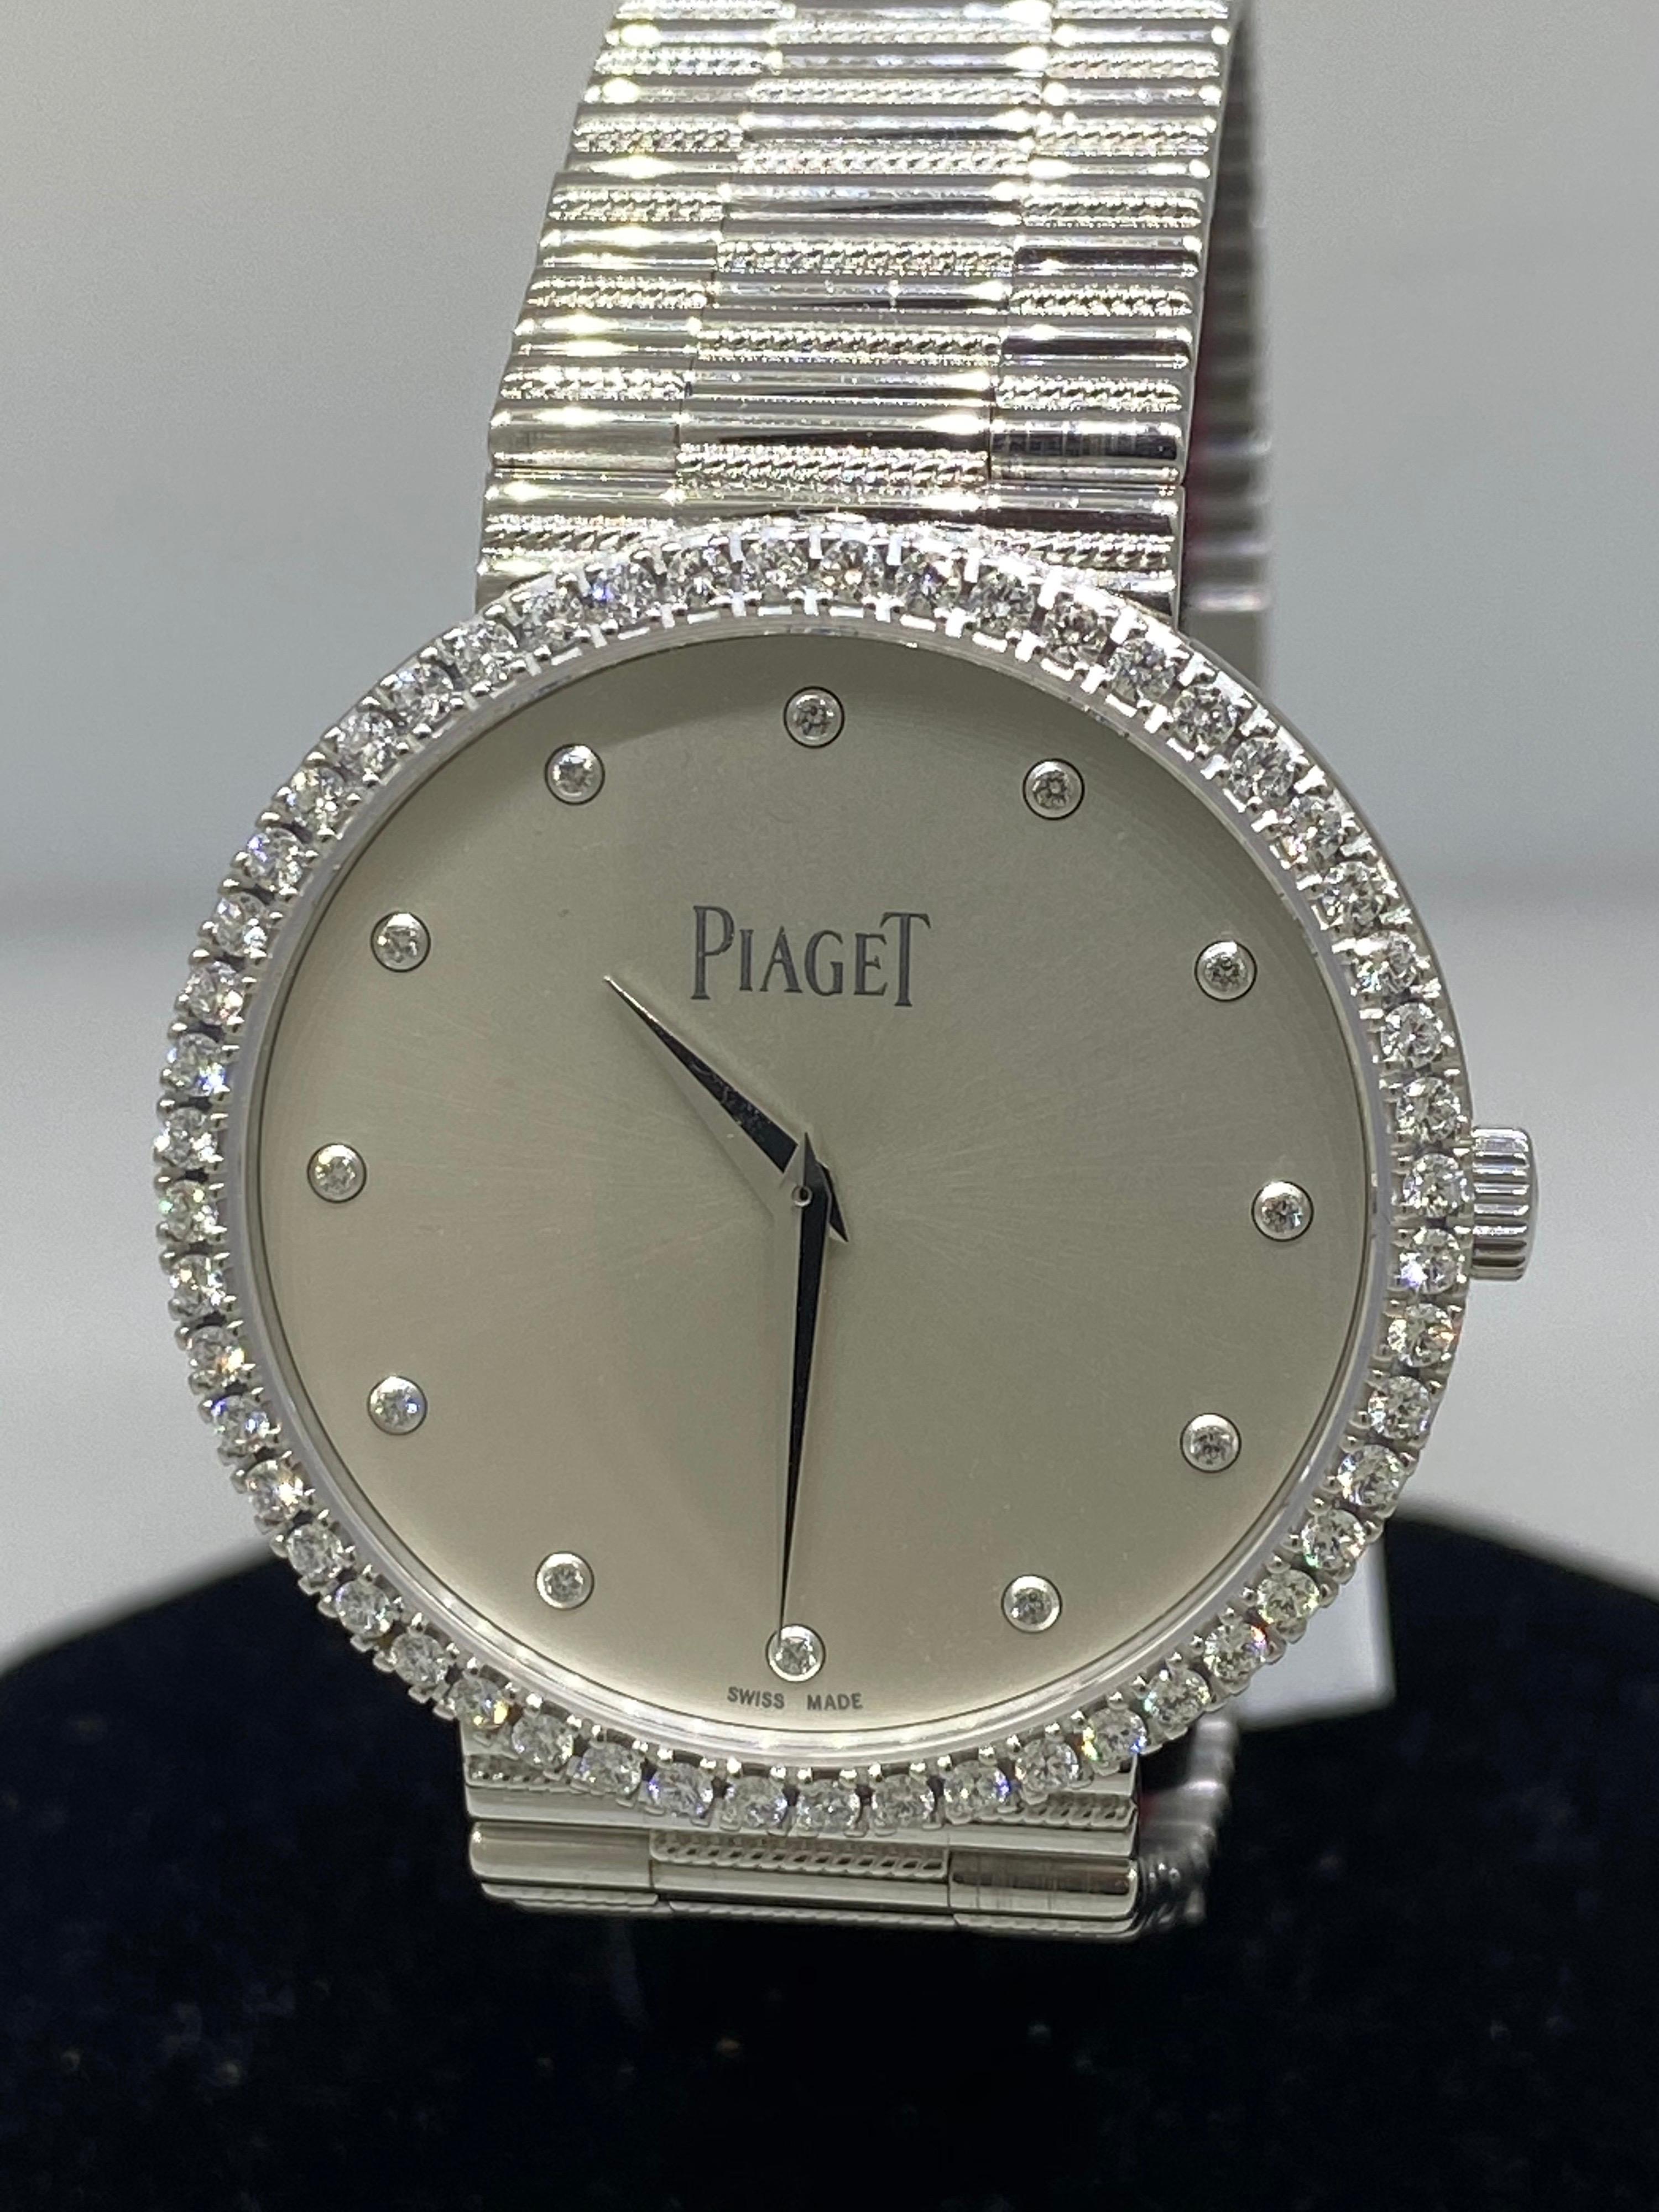 Piaget Traditional Ladies Watch

Model Number: G0A37045

100% Authentic

Brand New

Comes with original Piaget box and papers

18 Karat White Gold Case & Bracelet

Gold weight: 98.4gr

Bezel set with 52 diamonds (.8 carats)

Silver Dial

Diamond